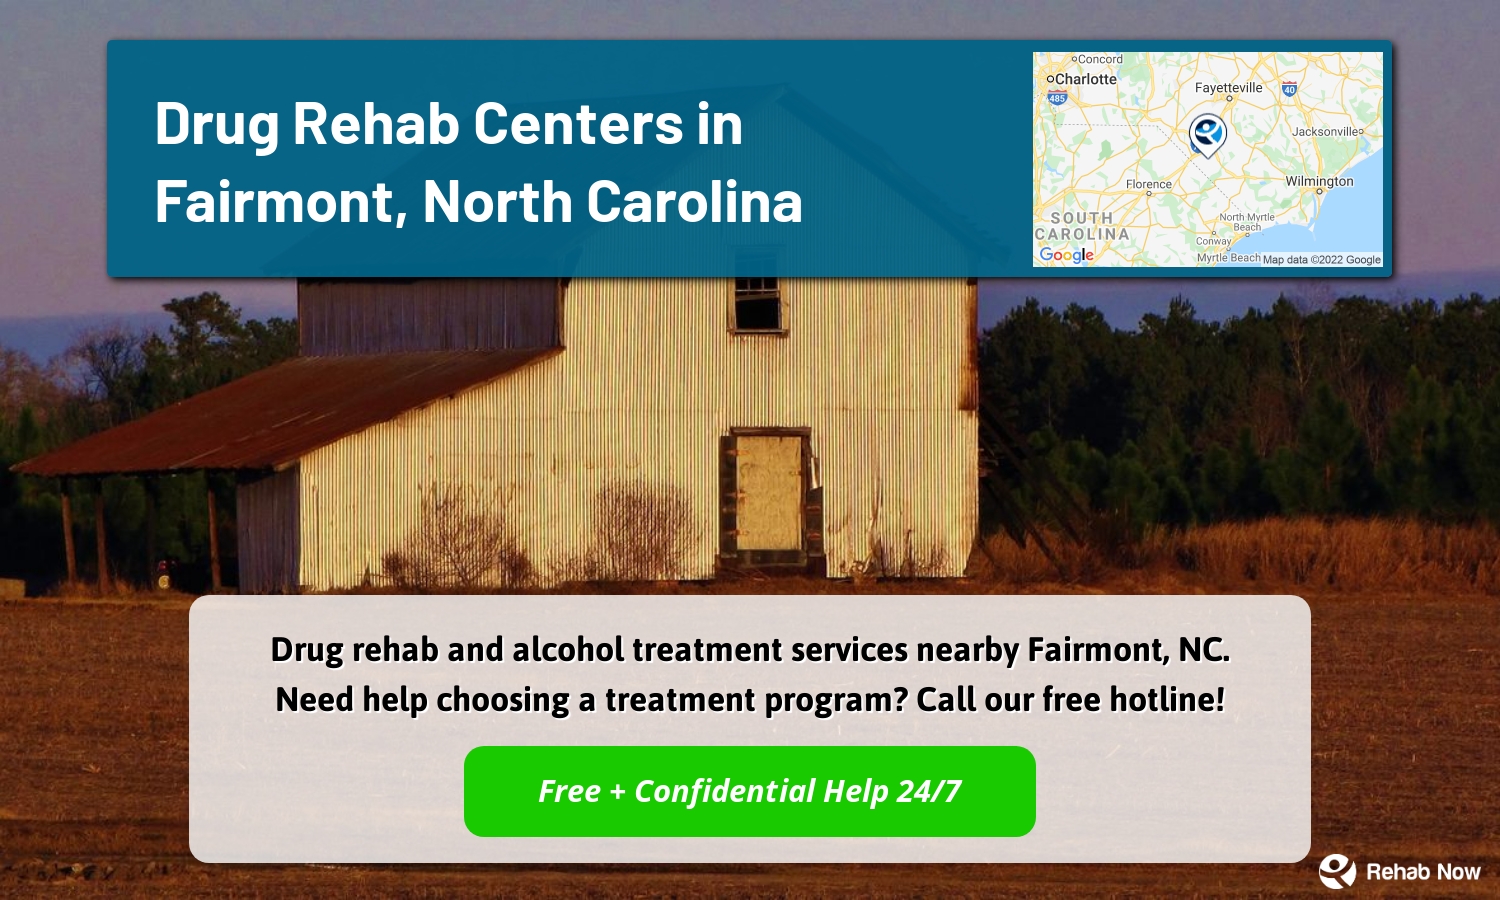 Drug rehab and alcohol treatment services nearby Fairmont, NC. Need help choosing a treatment program? Call our free hotline!